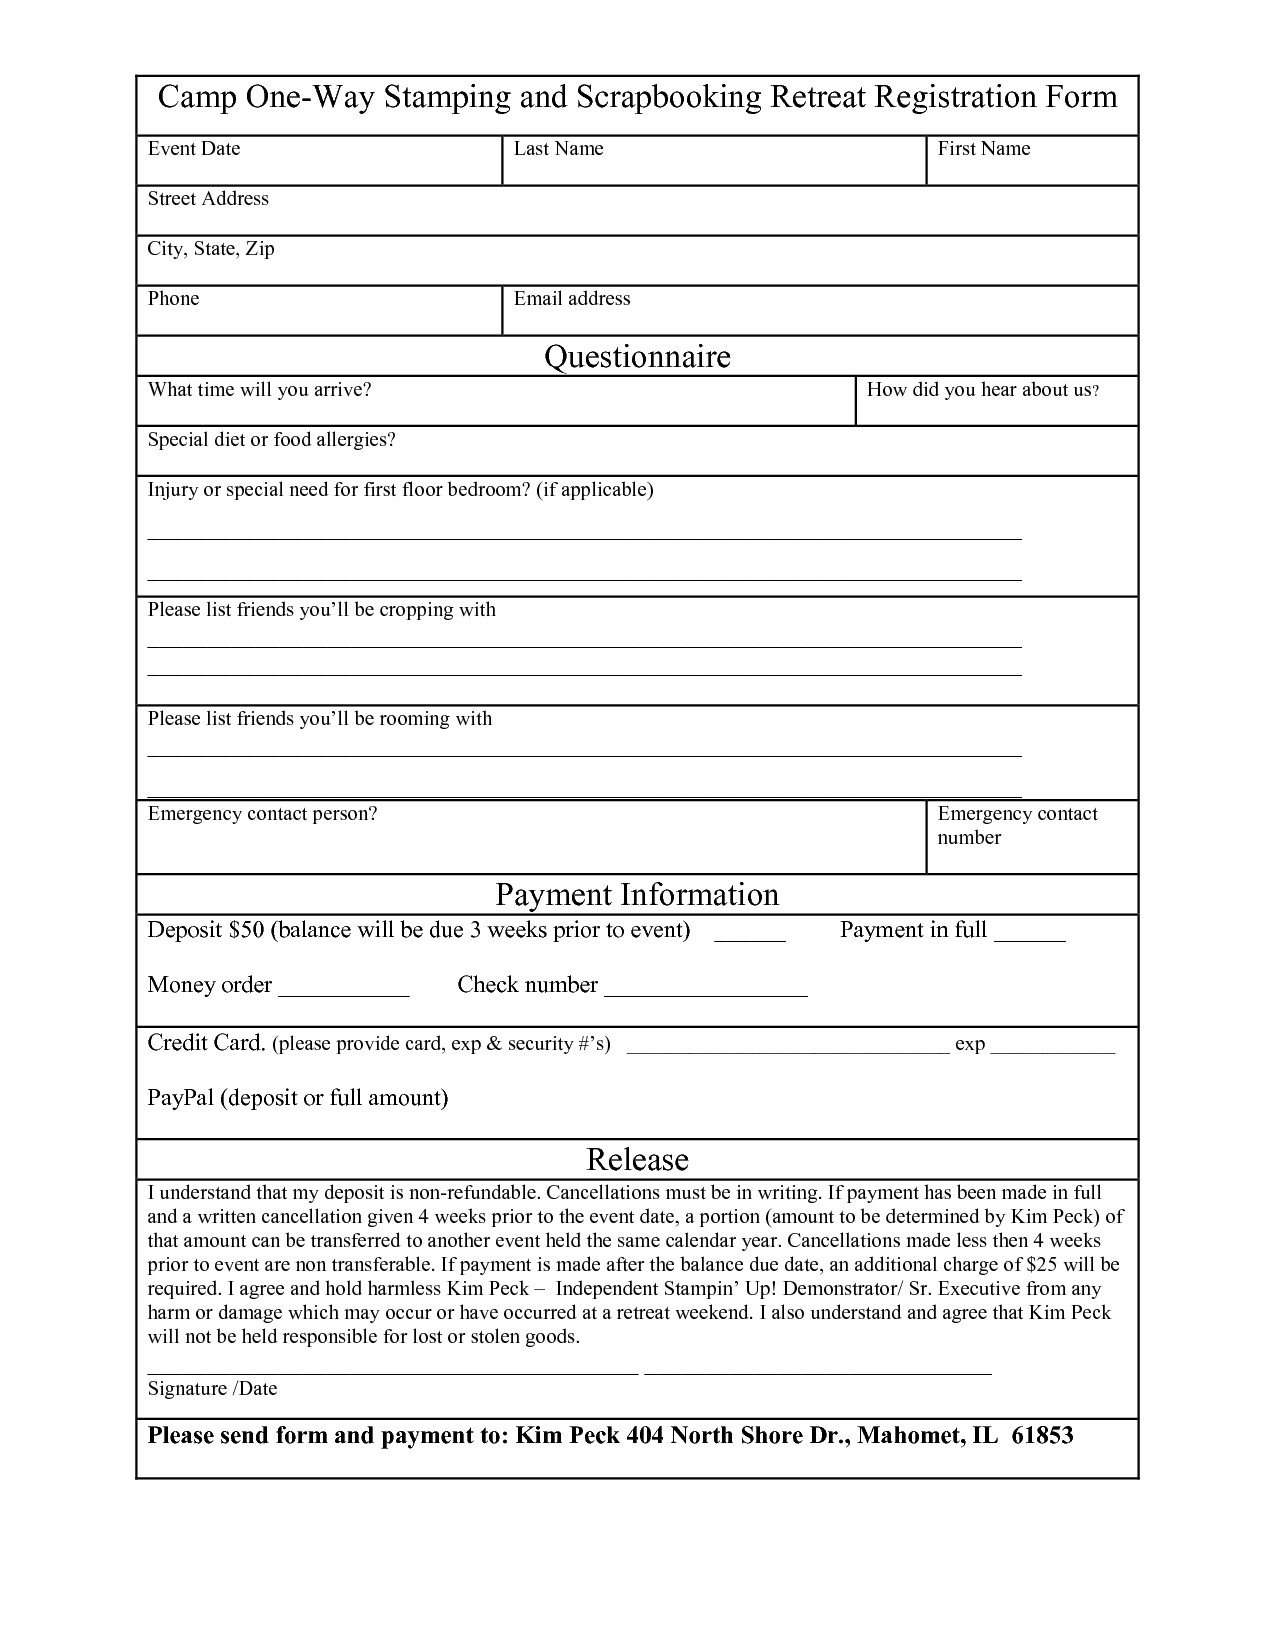 Free Registration Form Template Word Want a FREE refresher